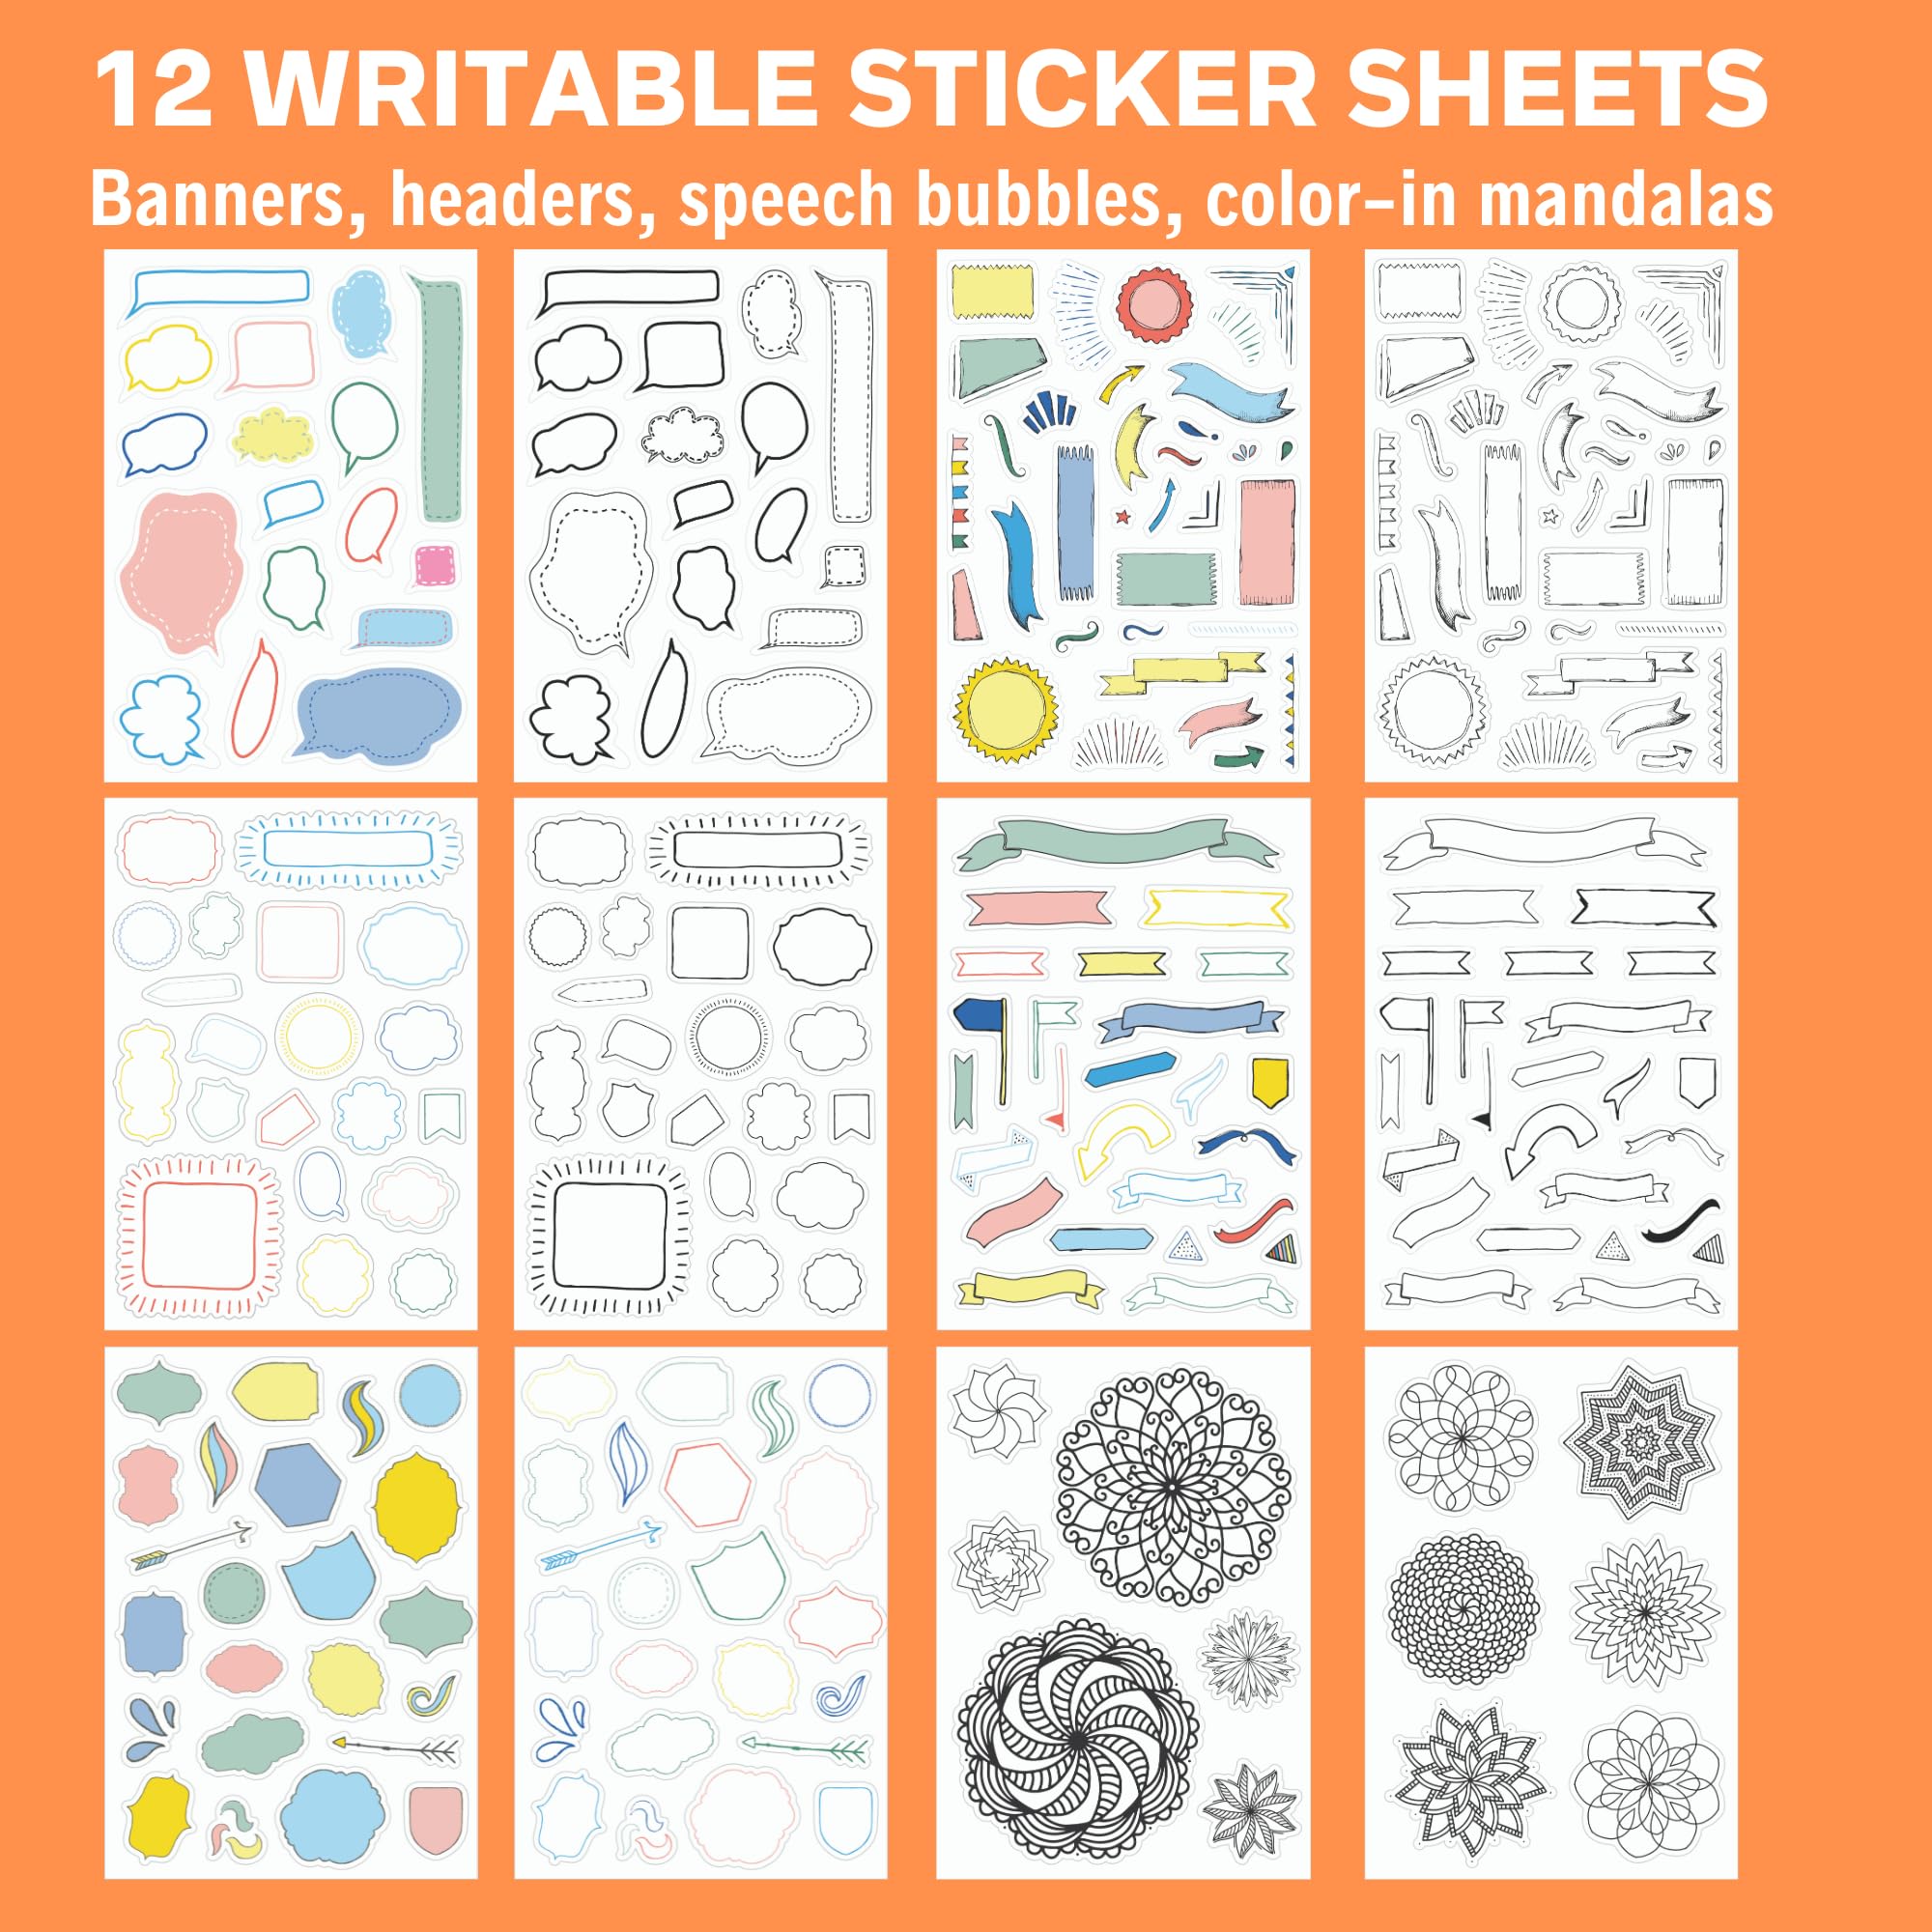 Ultimate Design Elements Planner Stickers Set - Value Pack of 24 Sheets - Clear Stickers, Banners, Arrows, Mandala Coloring - Cute Supplies and Accessories for Bullet Dotted Journals or Scrapbooking